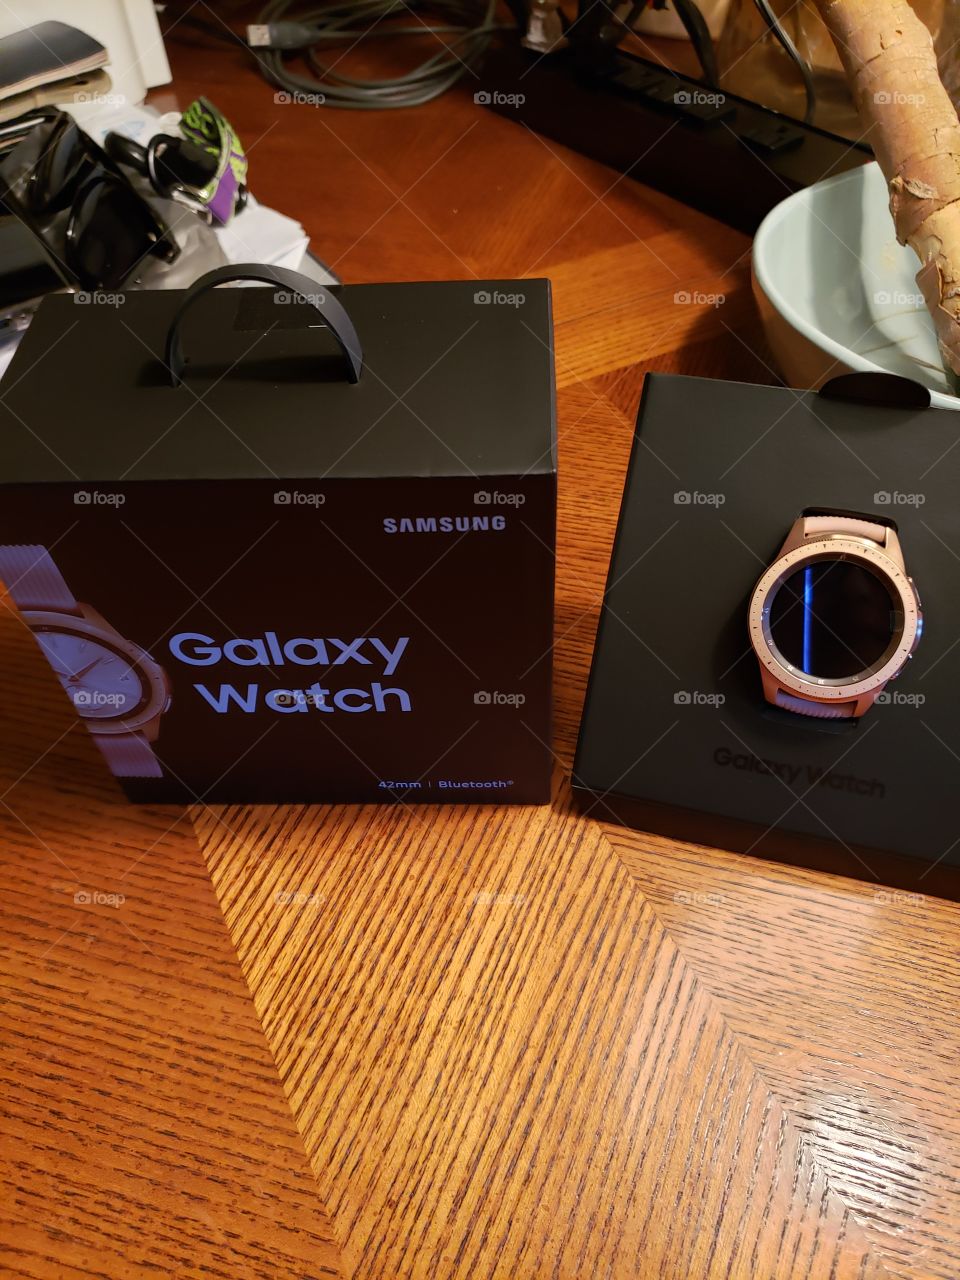 Arrival of New Samsung Galaxy Smart Watch!!! Big Day!!! ♡Love Samsung Products! Stunning Rose Gold Color!